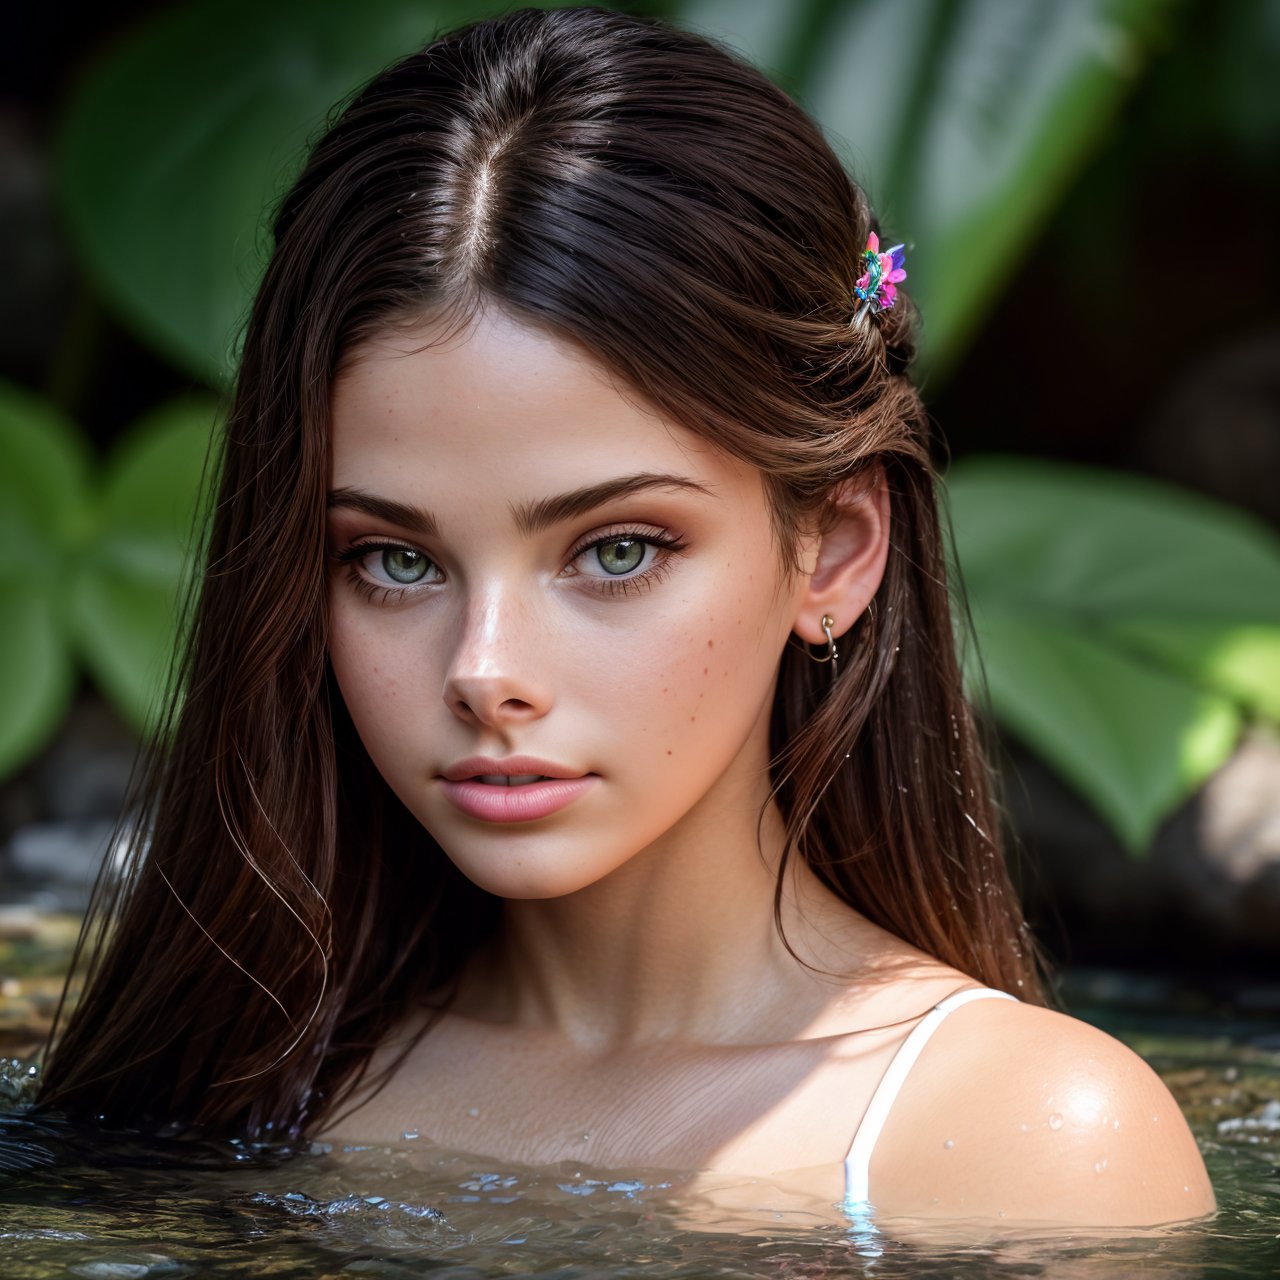 best quality, view from above, close up portrait of stunning (AIDA_LoRA_MeW2016:1.15) <lora:AIDA_LoRA_MeW2016:0.85> in a one peace bathsuit sitting on the stones in a tropical garden with a waterfall behing her, water, wet, little girl, pretty face, open mouth, intricate pattern, studio photo, studio photo, kkw-ph1, (colorful:1.1)